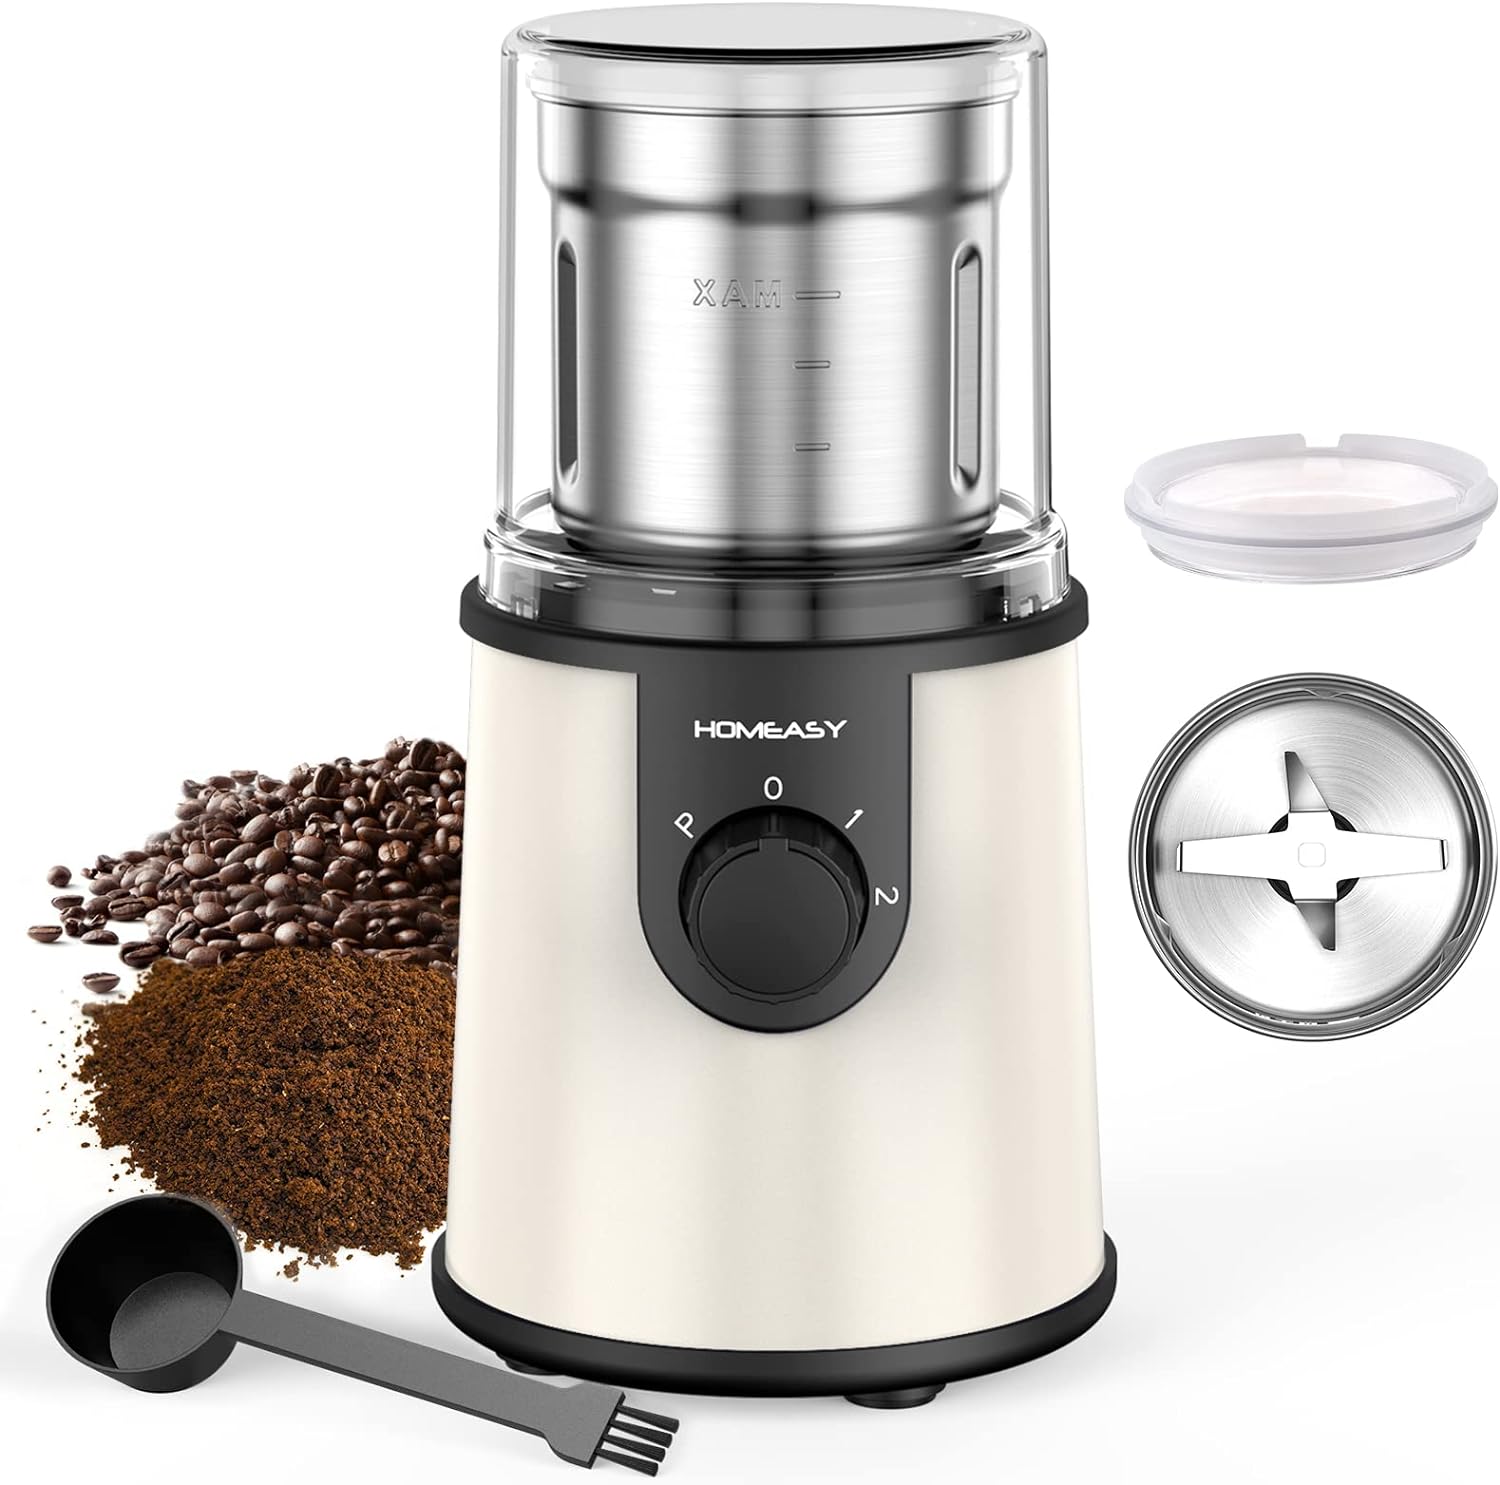 HomeAsy Electric Coffee Grinder 350 W Coffee Grinder Electric Propeller Mill With Stainless Steel Blades Disc Mill in 80g Capacity Coffee Bean Mill For Spices Bean Seeds Pepper Sugar etc. White